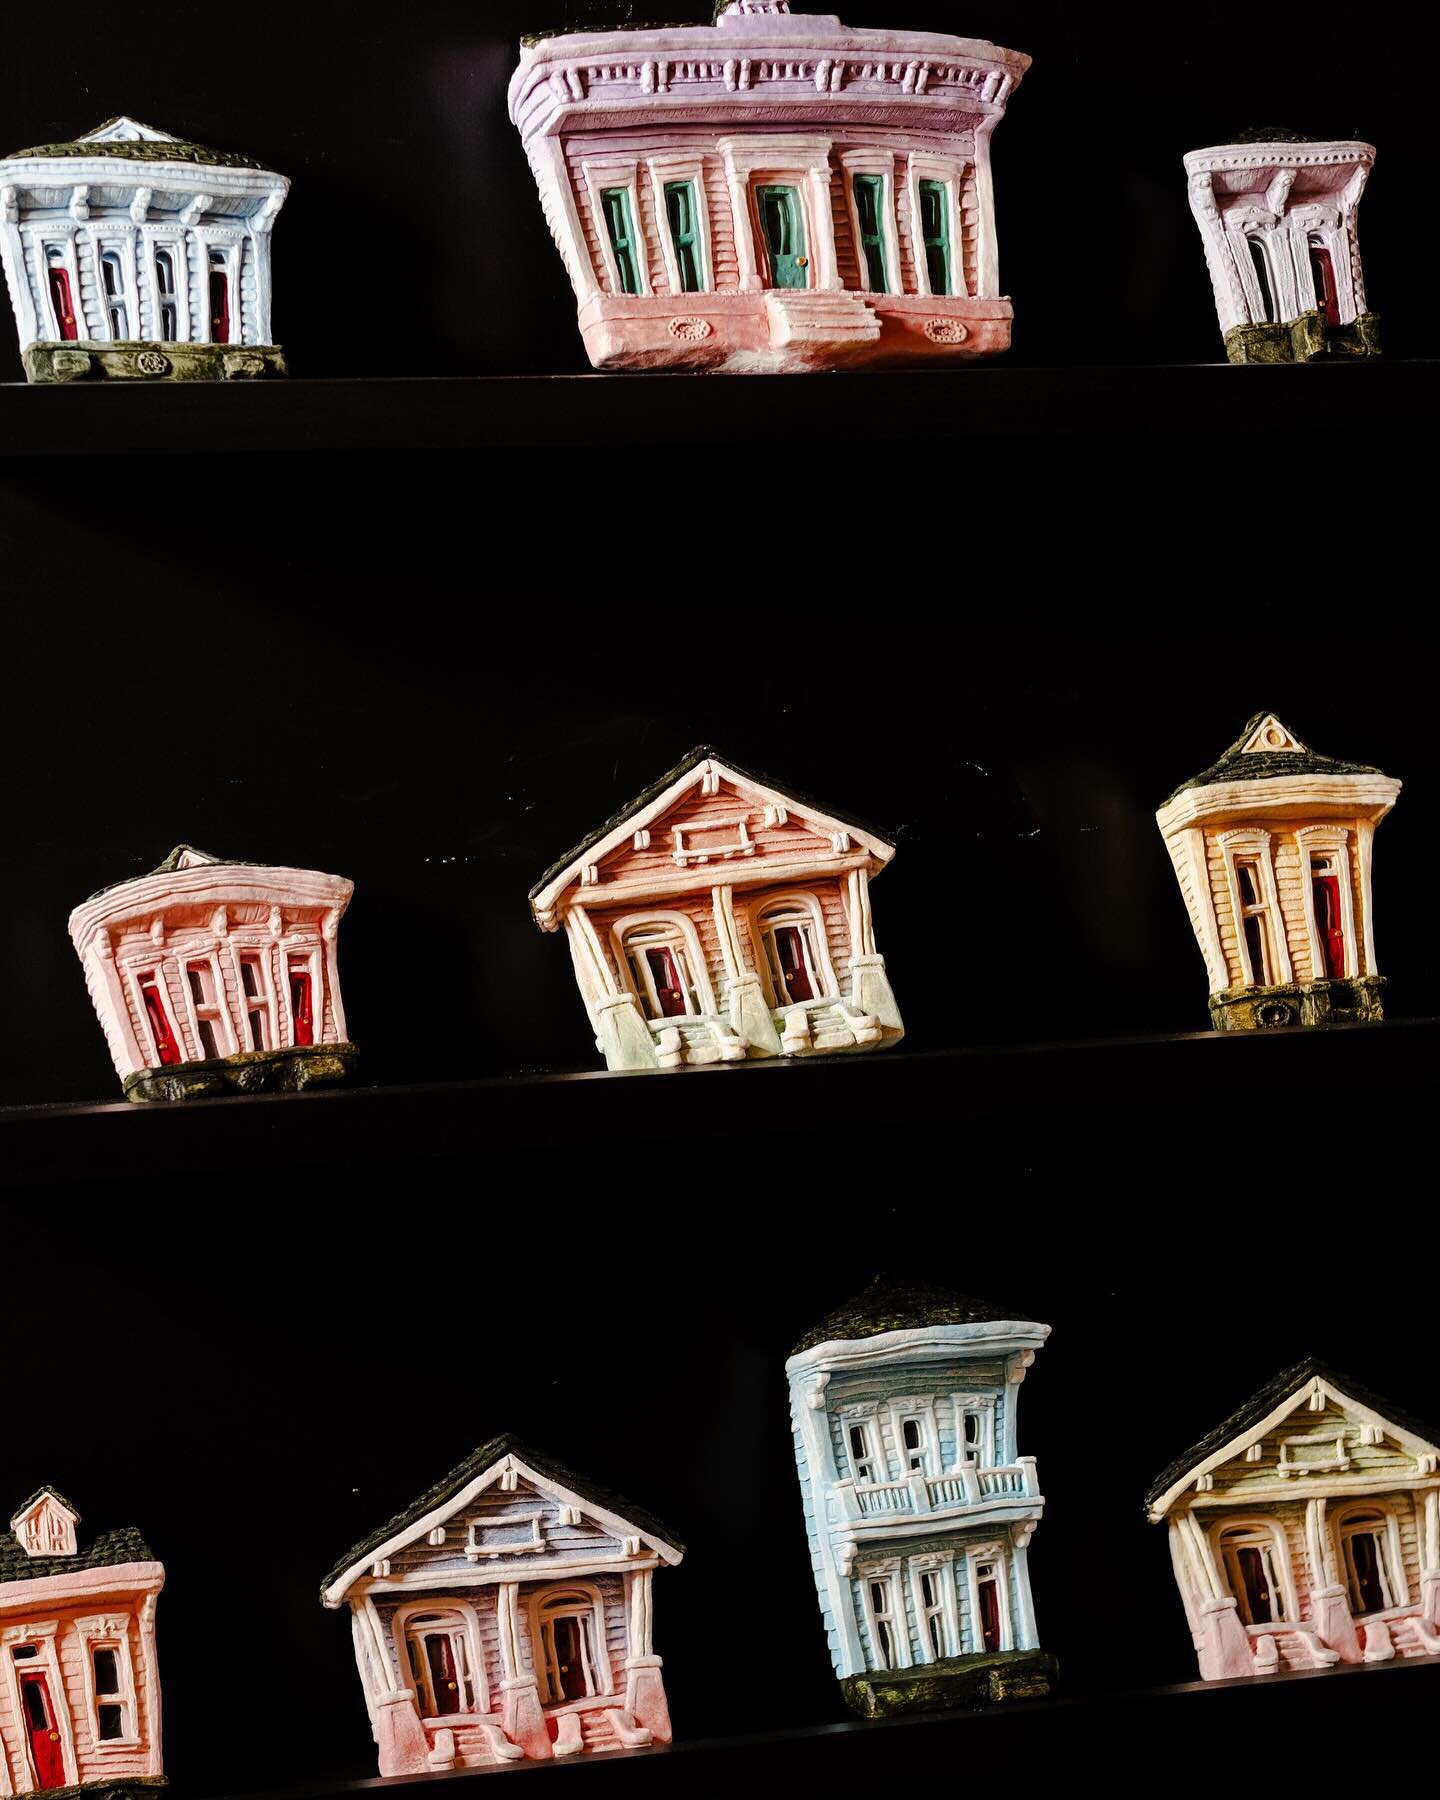 As the weekend approaches, we hope to see you in the store to explore our newest wonders! The whimsical houses from @hausofplaster are just one of the fantastic new treasures that await you. ✨